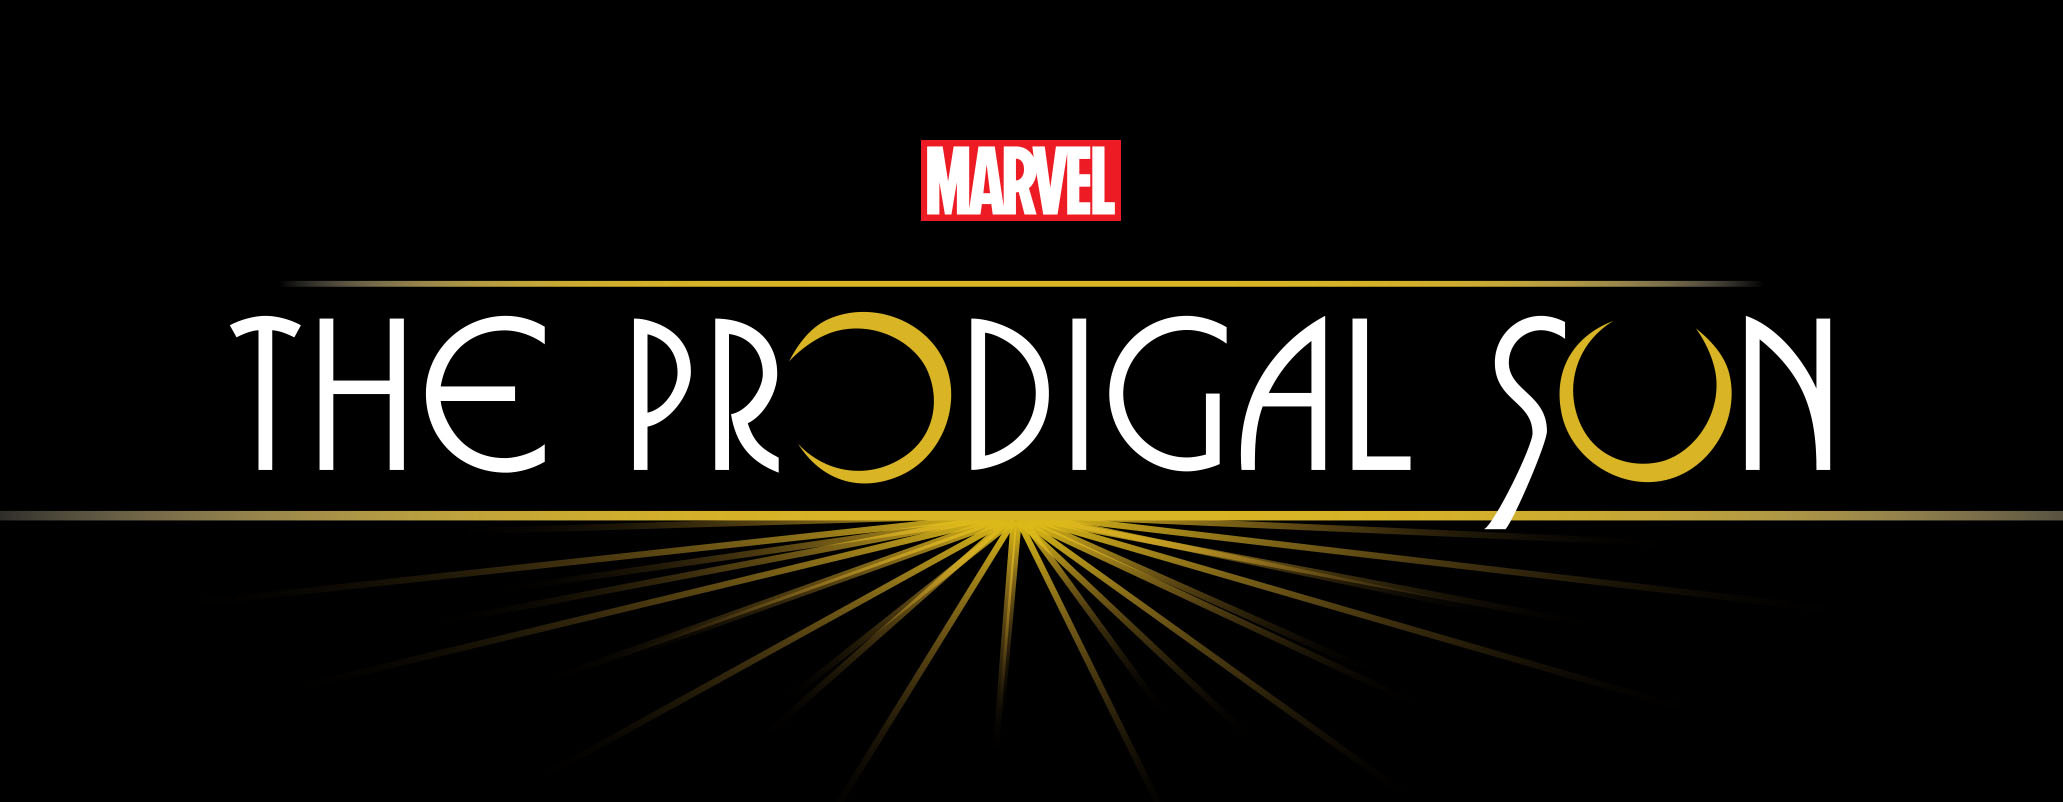 The Prodigal Sun storyline Logo.  Published by Marvel Entertainment